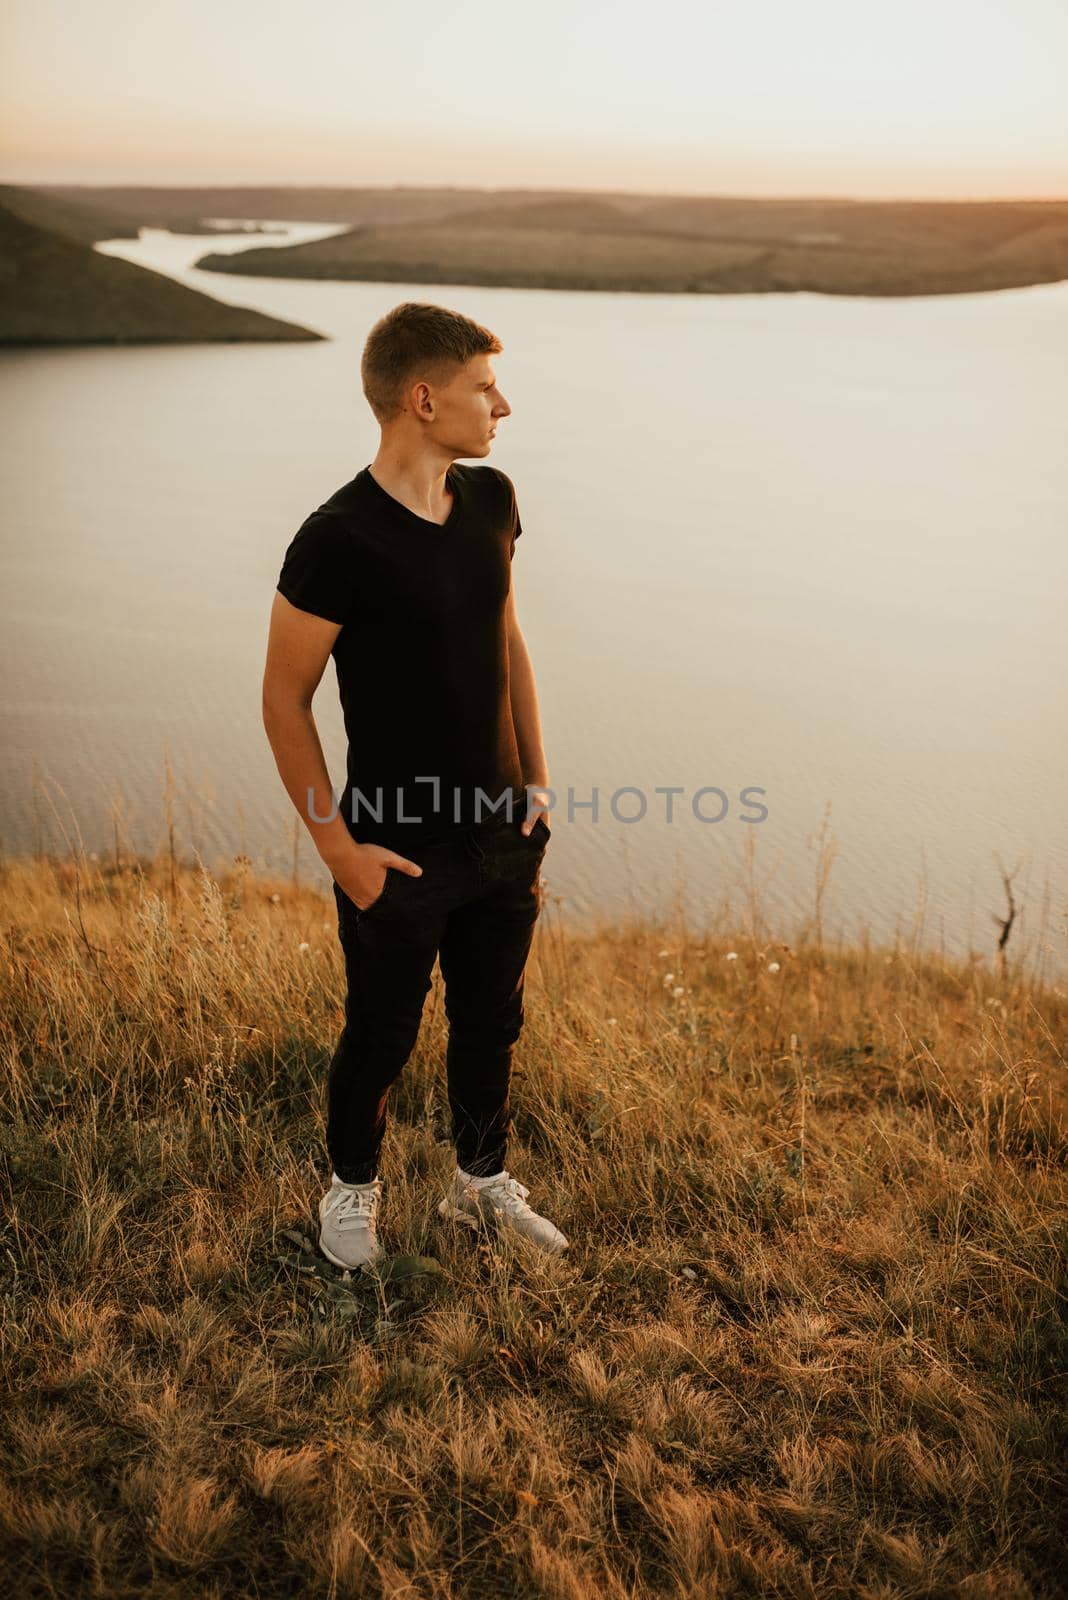 Bakota, Ukraine - 08.12.2020: A young athletic man in black casual clothes by AndriiDrachuk